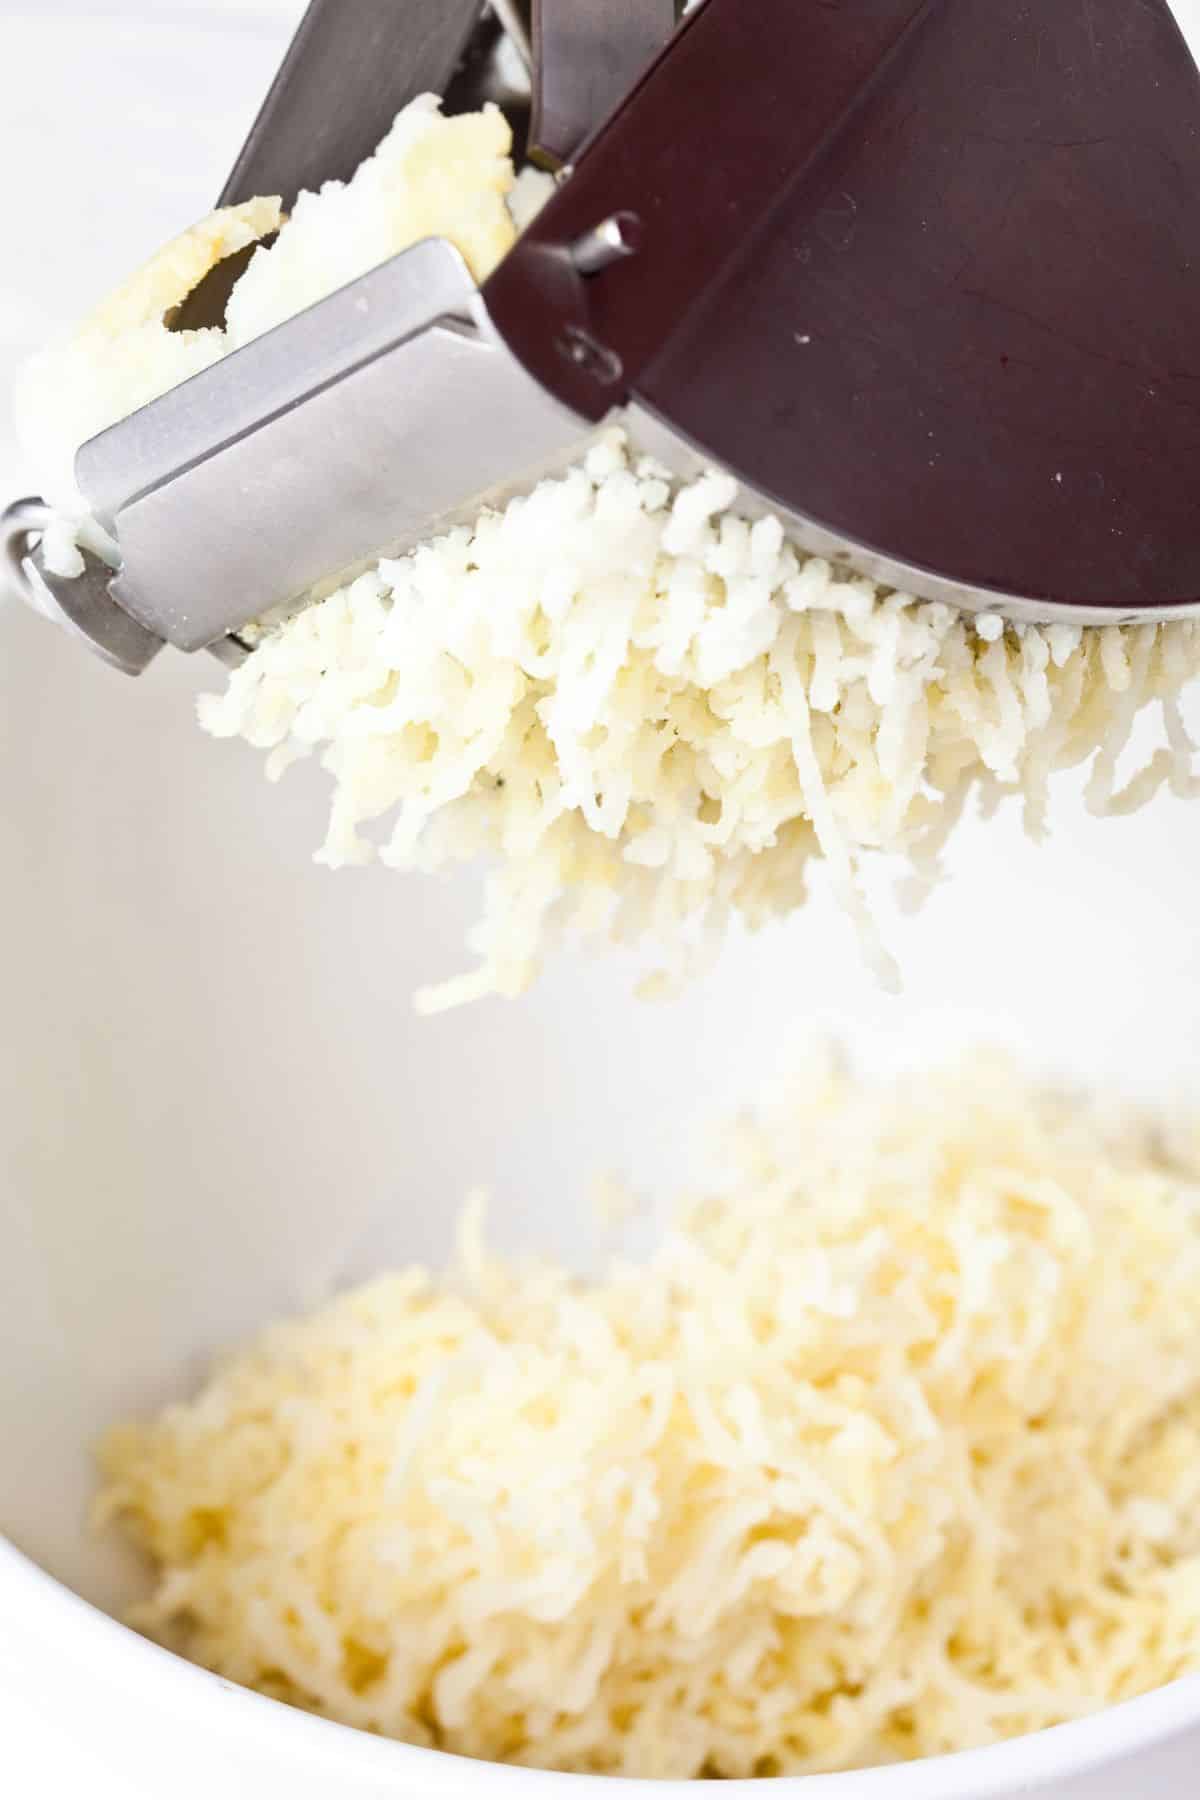 It is optional to use a ricer, but this will yield the very best mashed potato consistency.